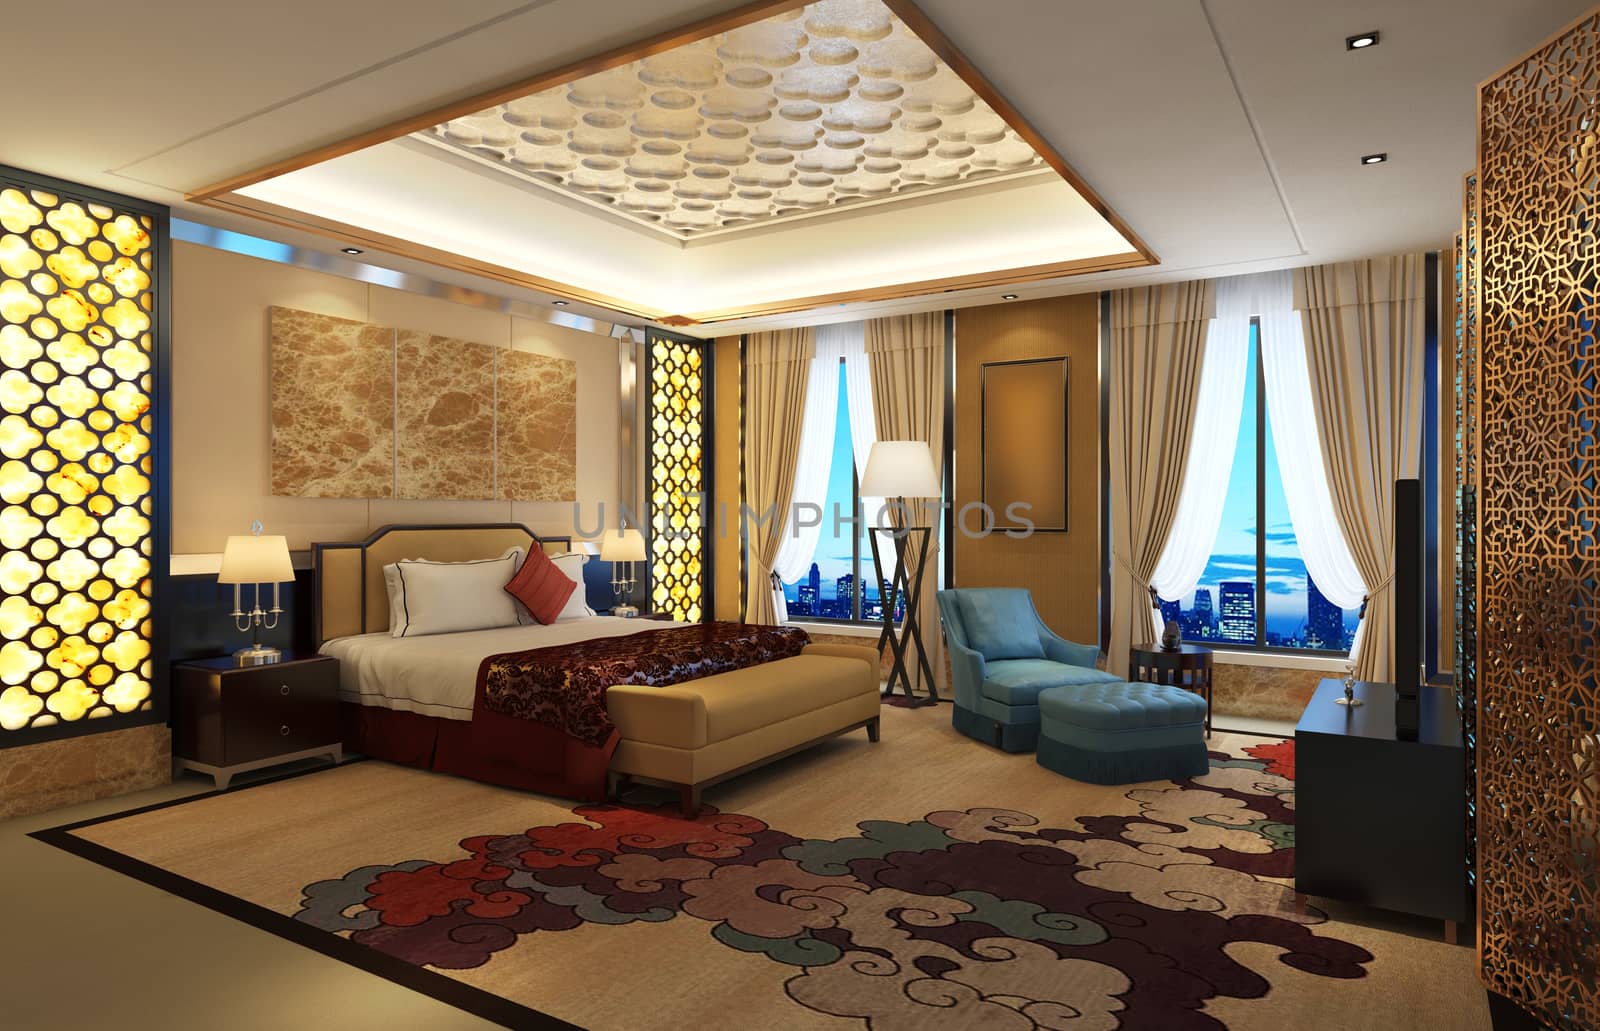 Photorealistic 3d rendering of the hotel room interior